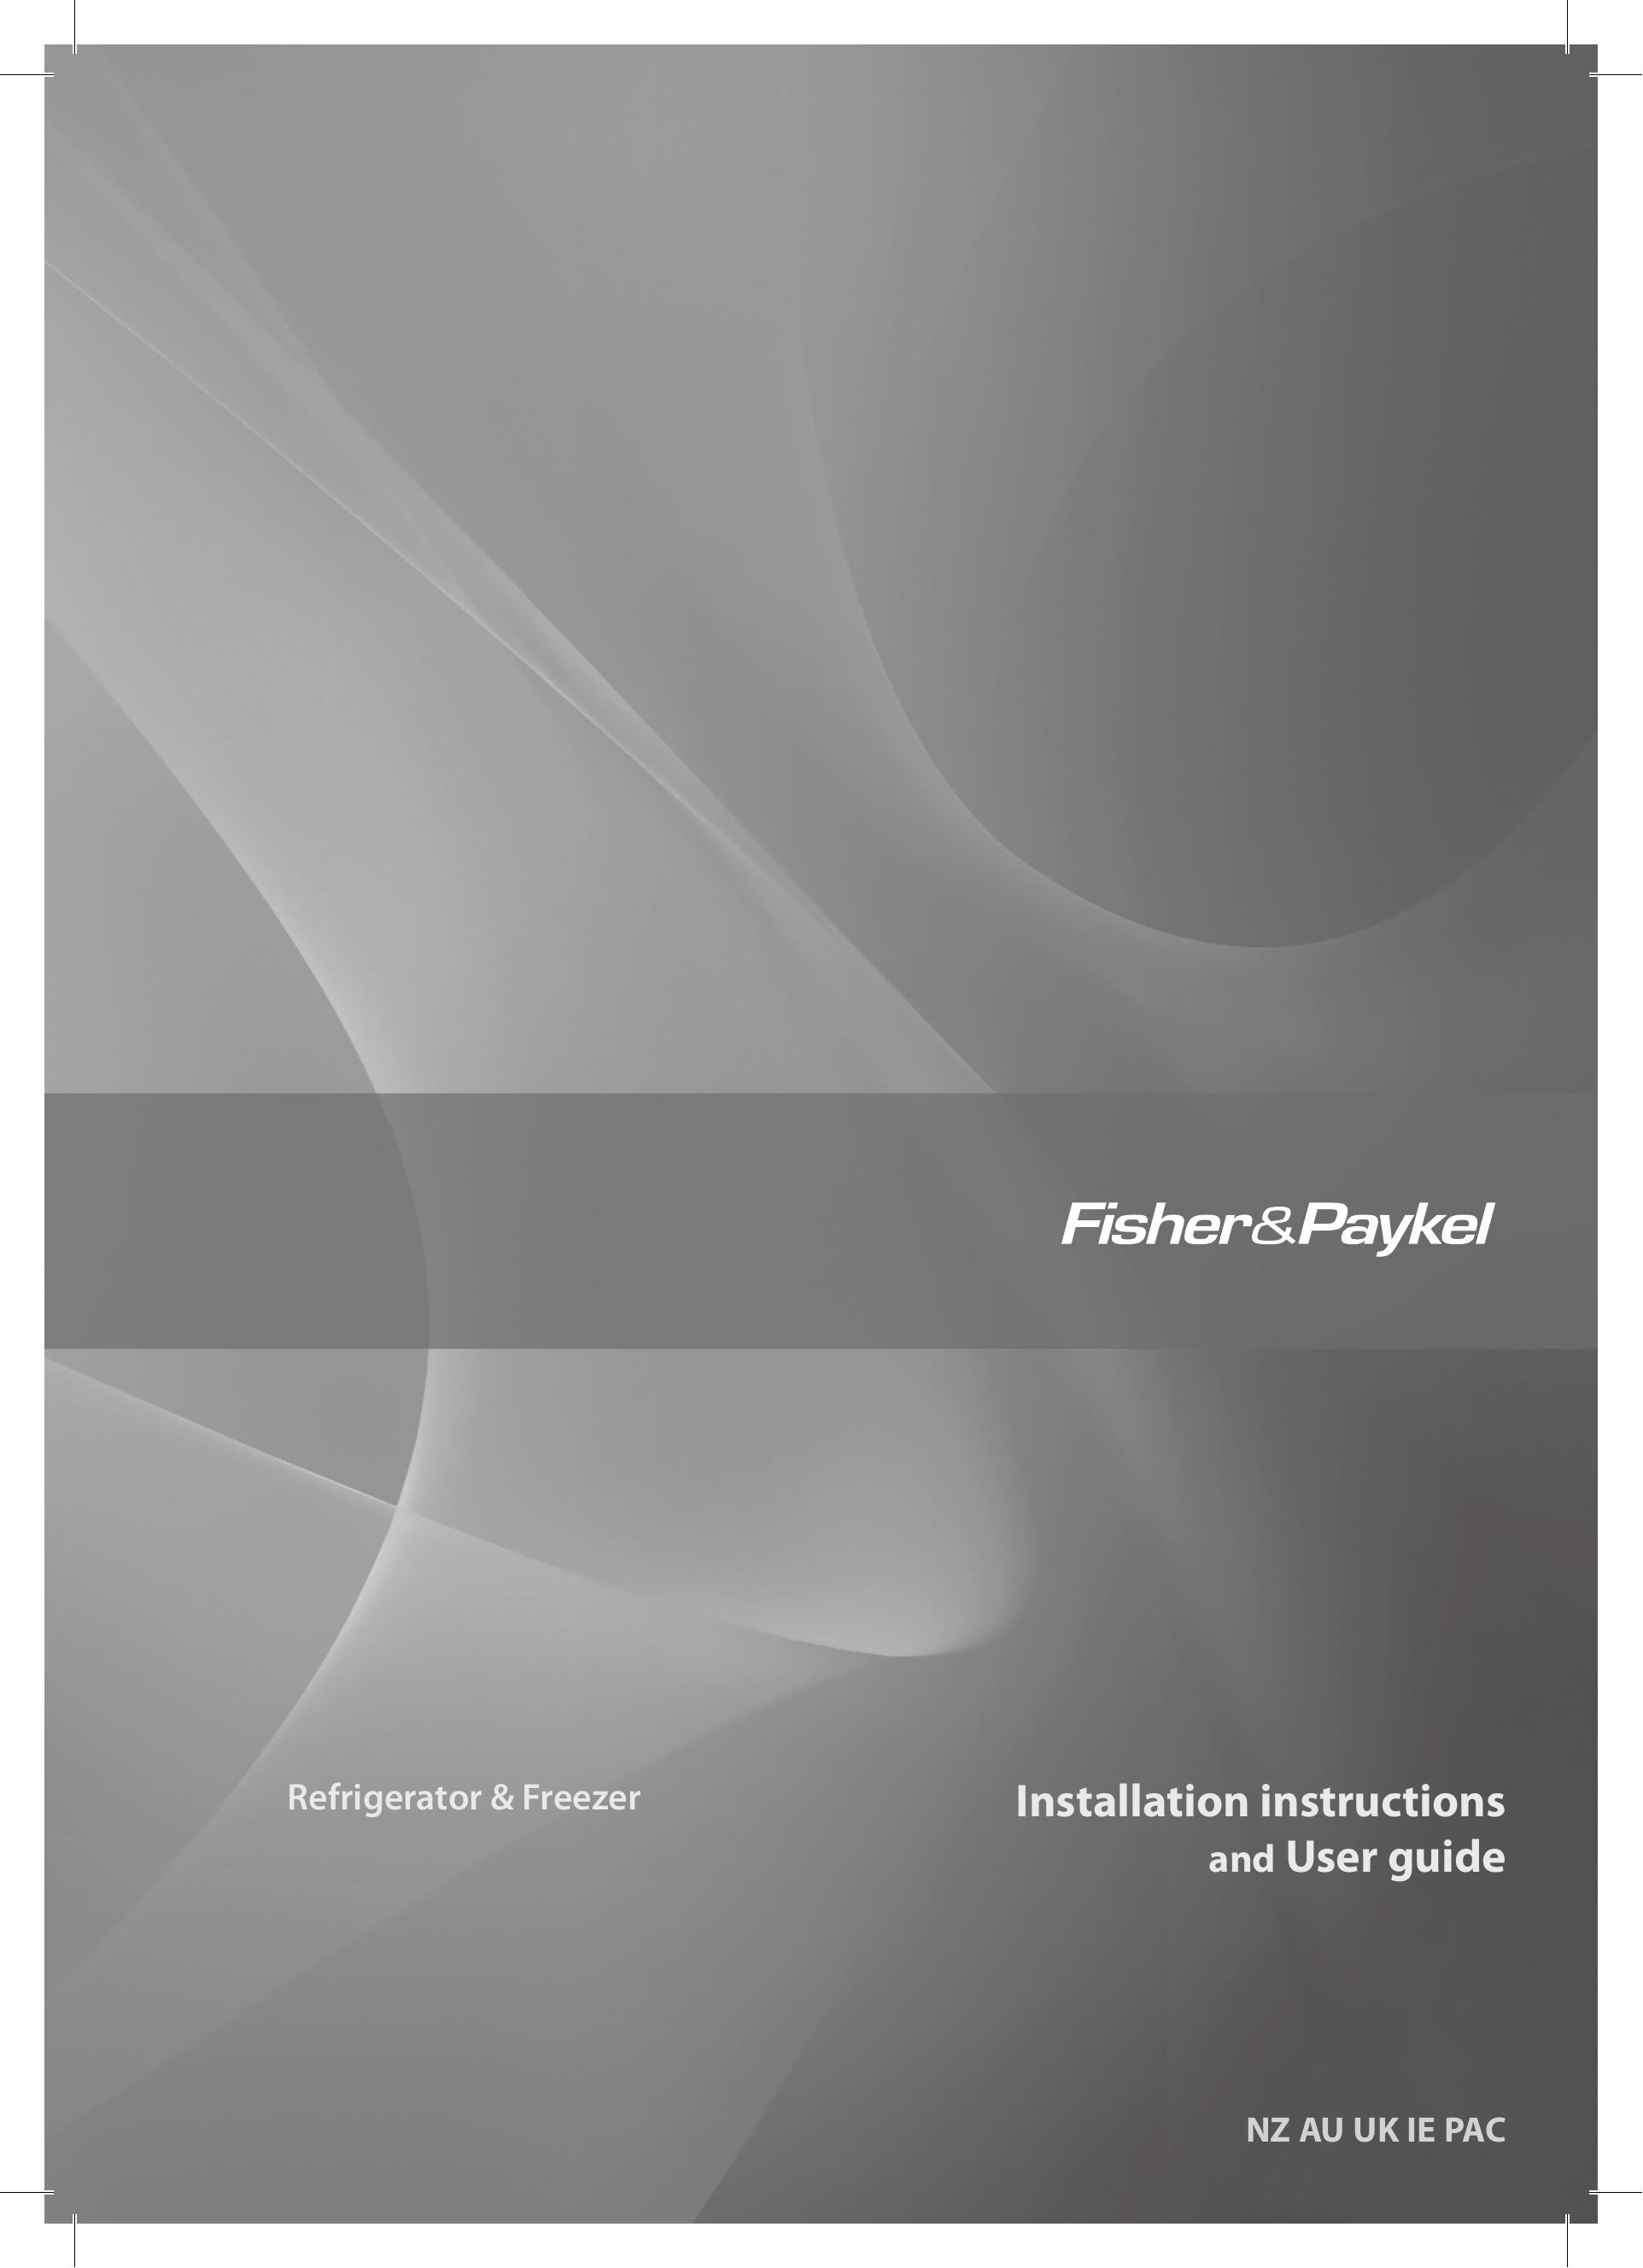 Fisher & Paykel E373 Refrigerator User Manual